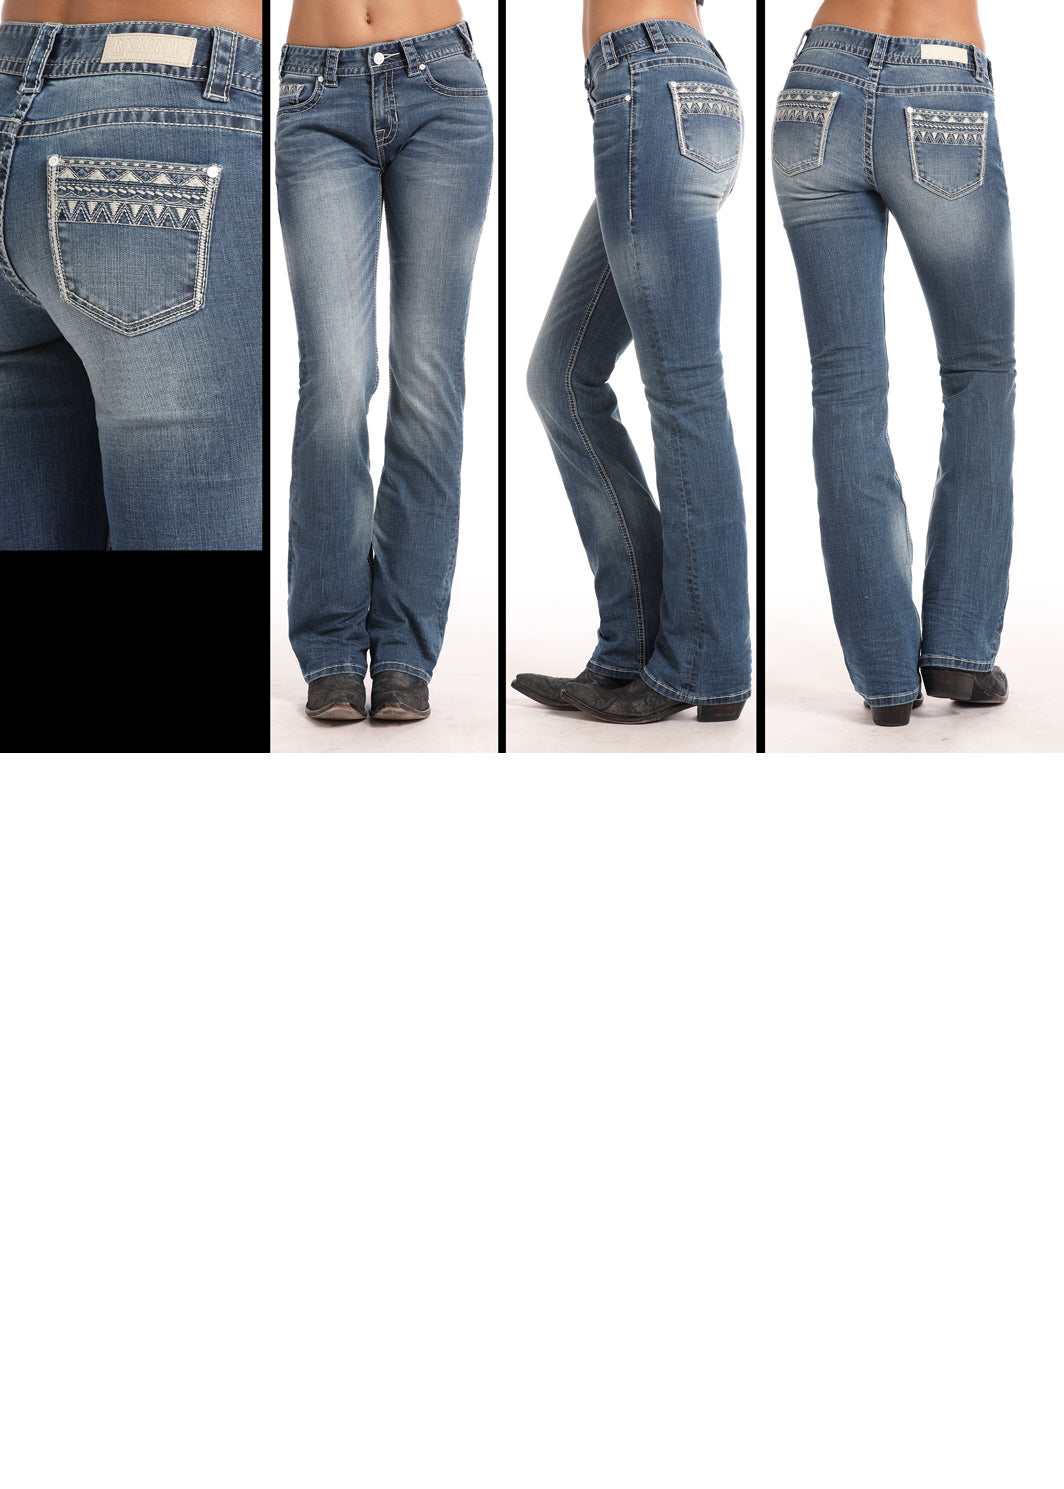 rock & roll riding jeans